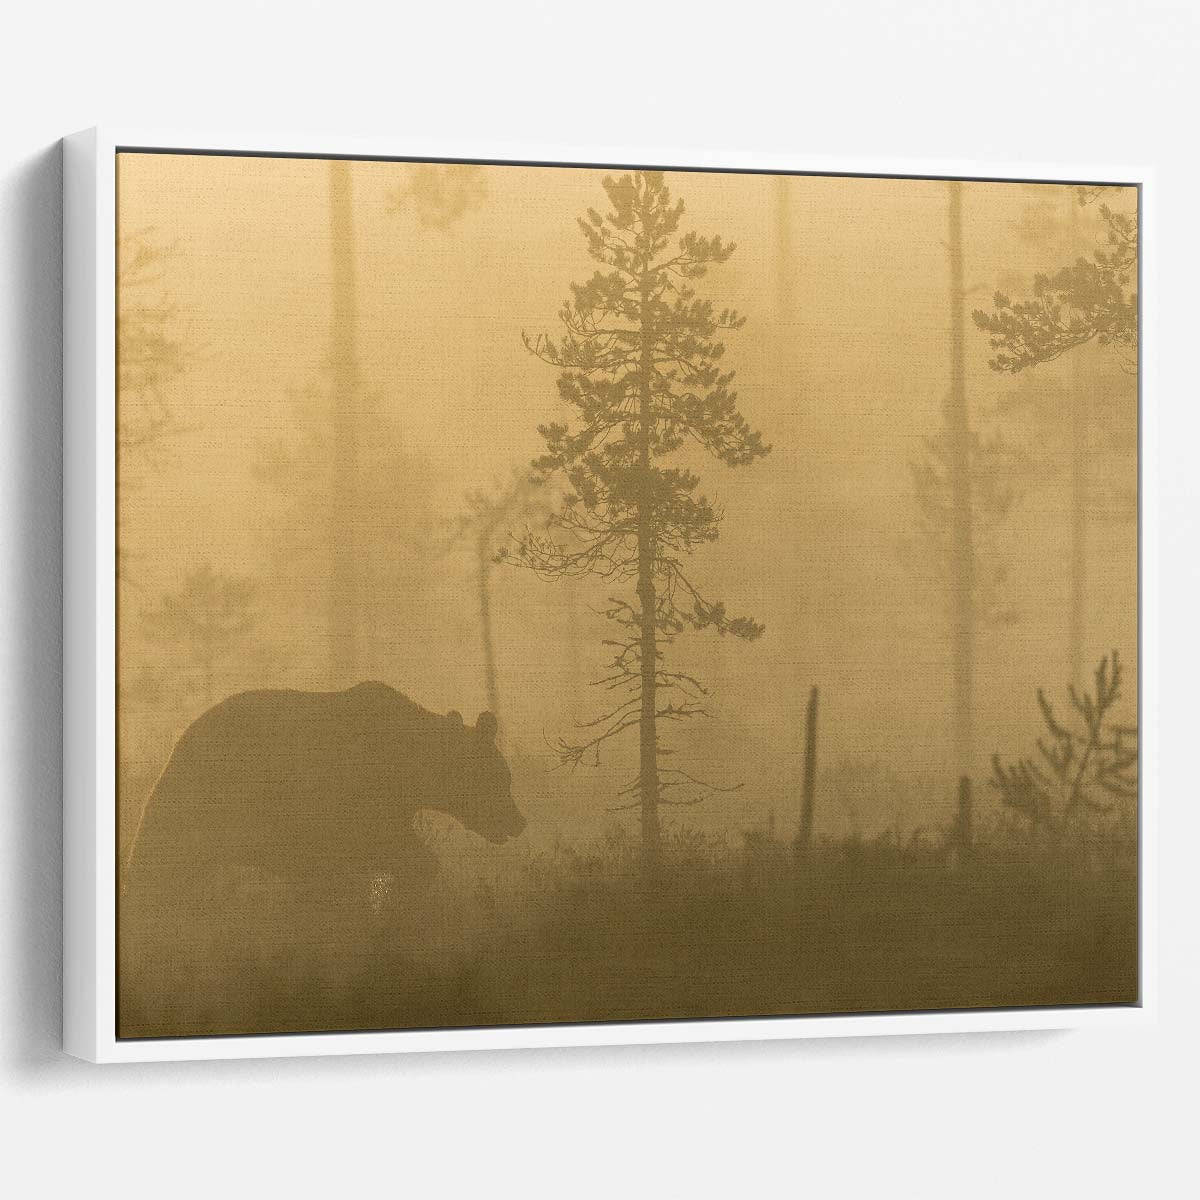 Misty Dawn Bear Silhouette Forest Landscape Wall Art by Luxuriance Designs. Made in USA.